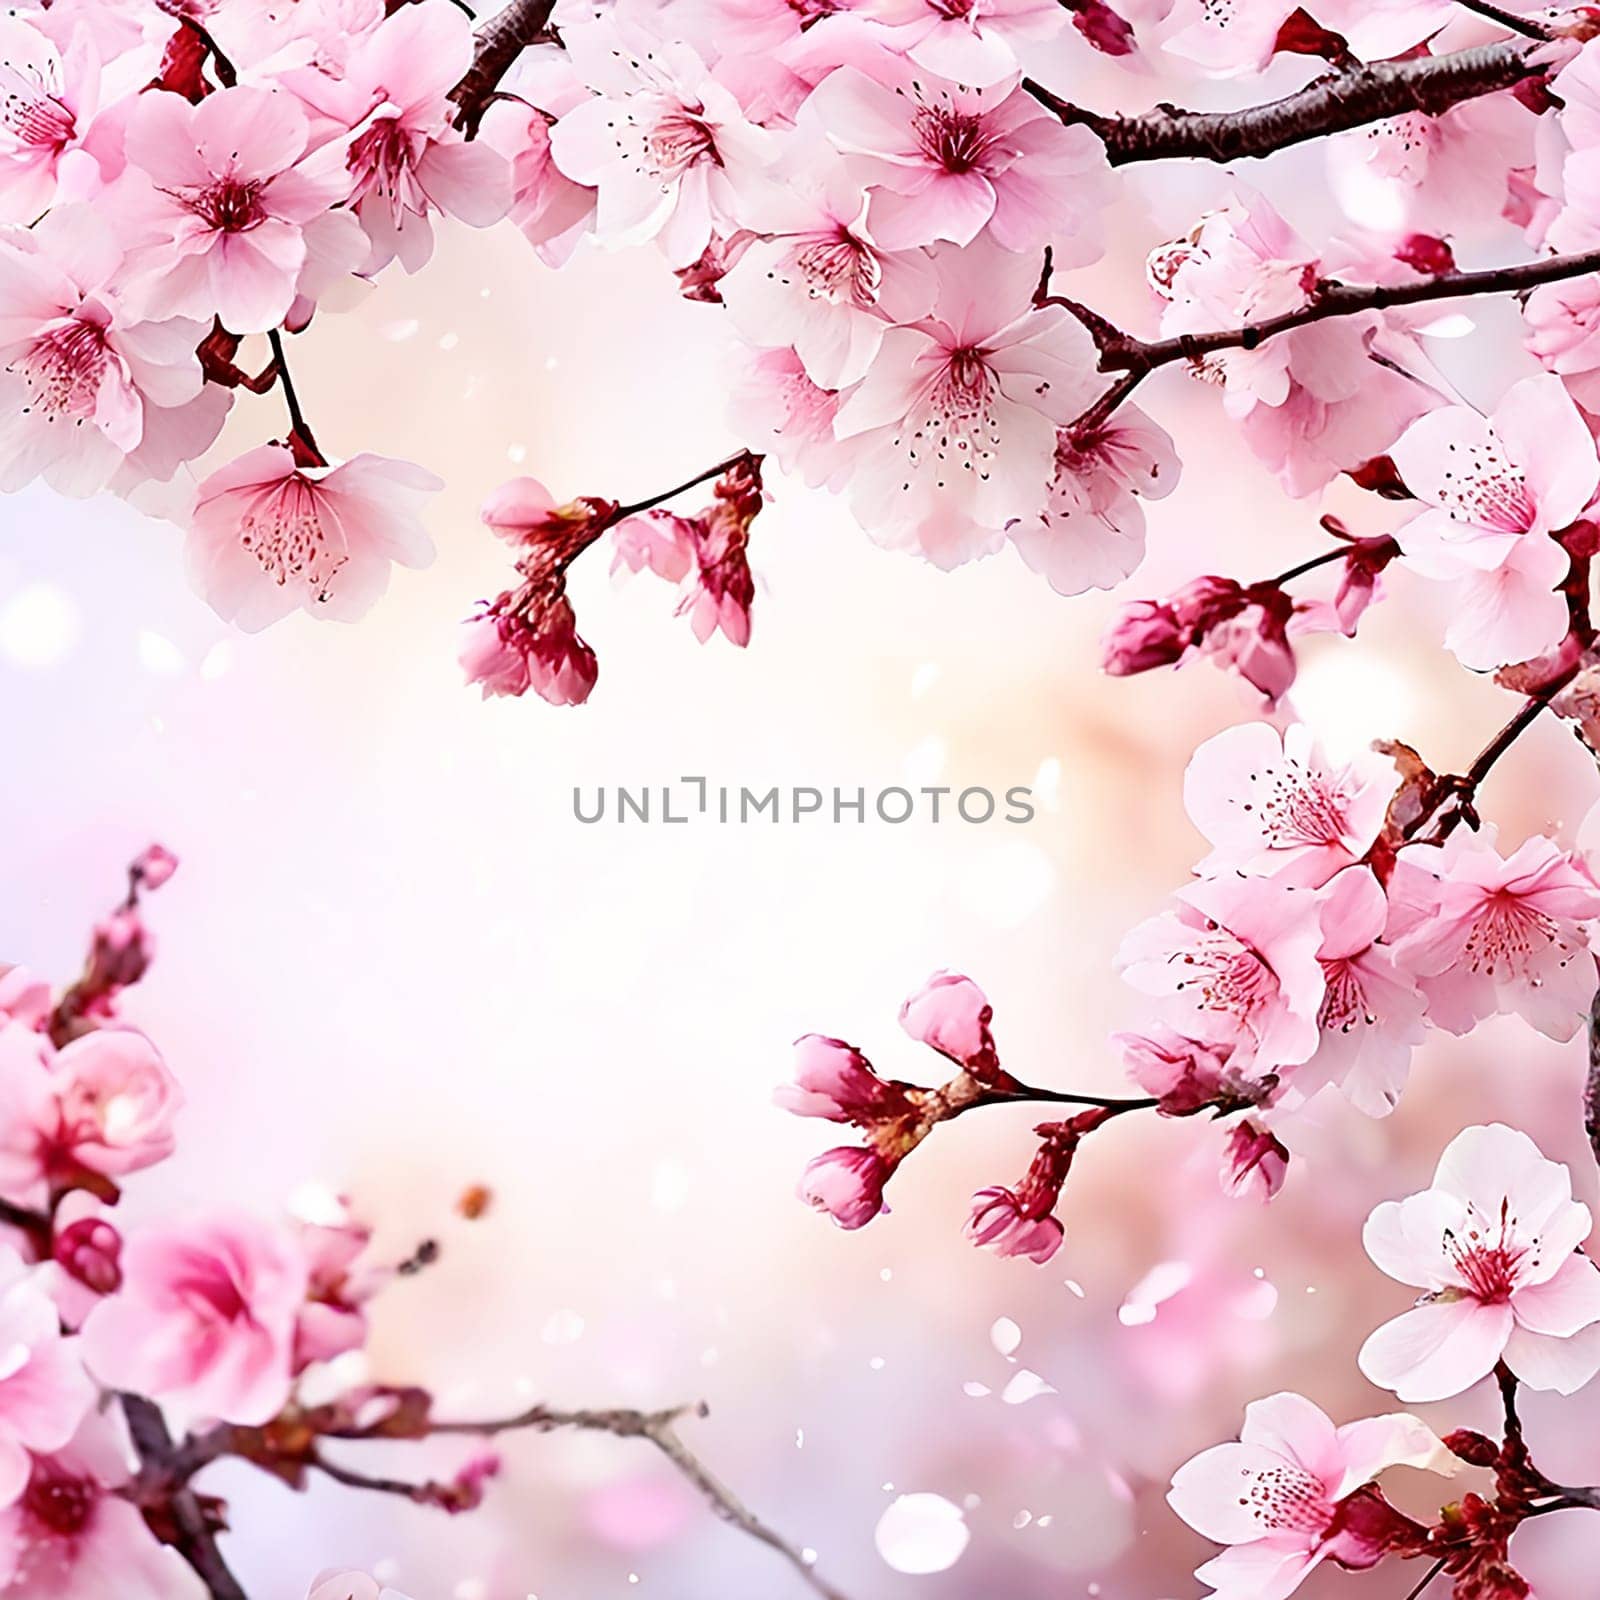 Sakura Splendor: Blossom-filled Spring Banner with Cherry Blossoms and Floral Pattern by Petrichor